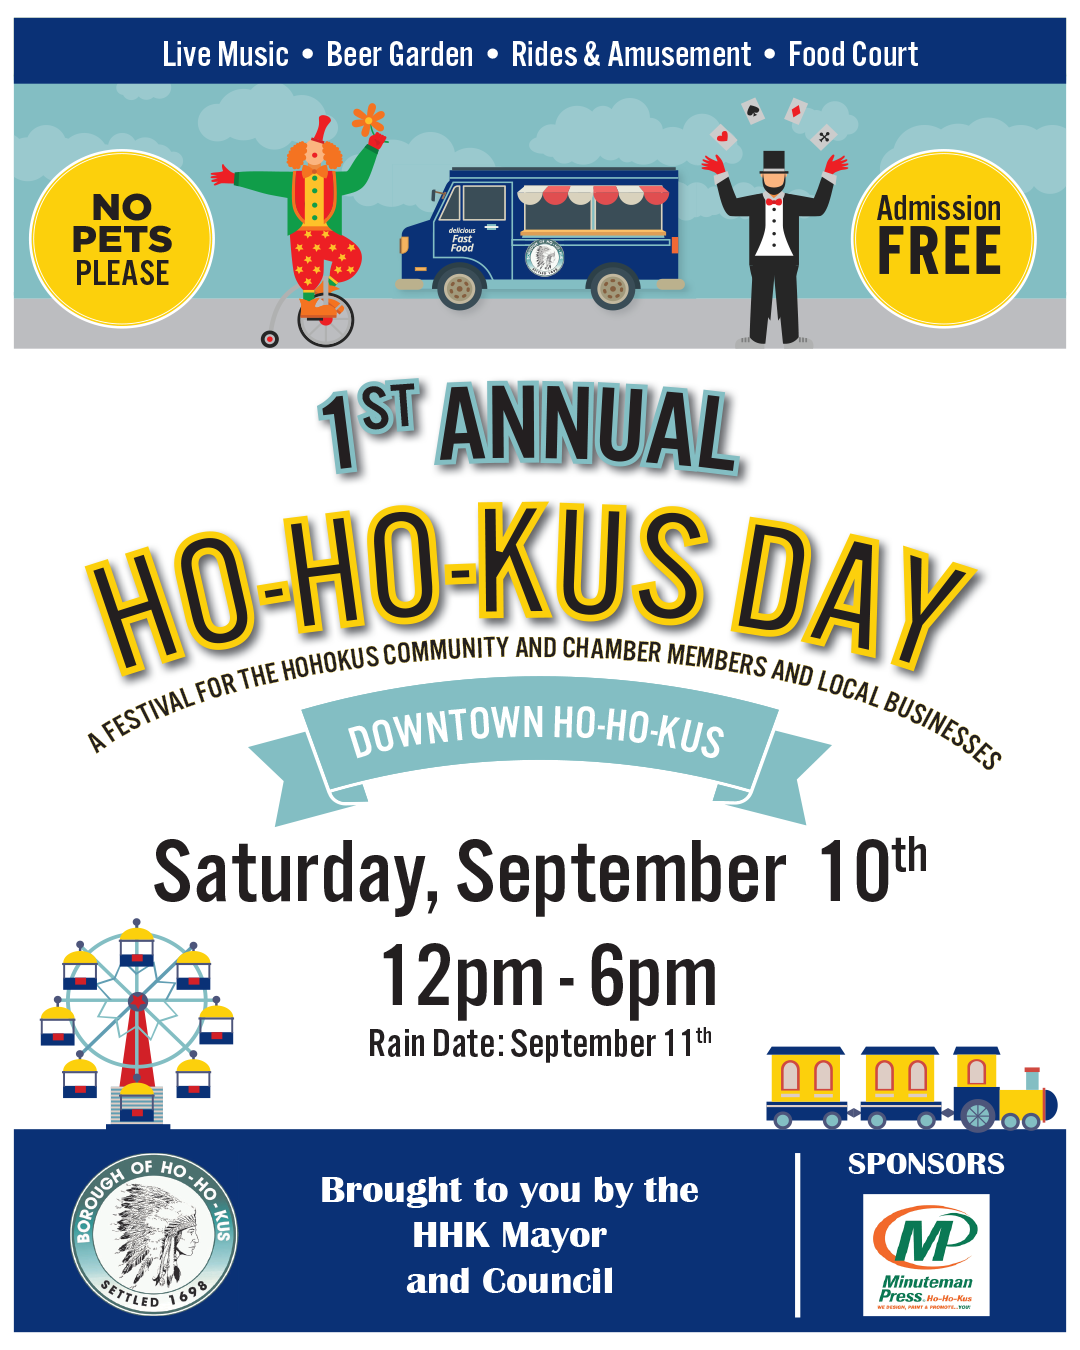 First Annual Ho-Ho-Kus Day Saturday, September 10th from 12pm-6pm Rain Date: September 11th